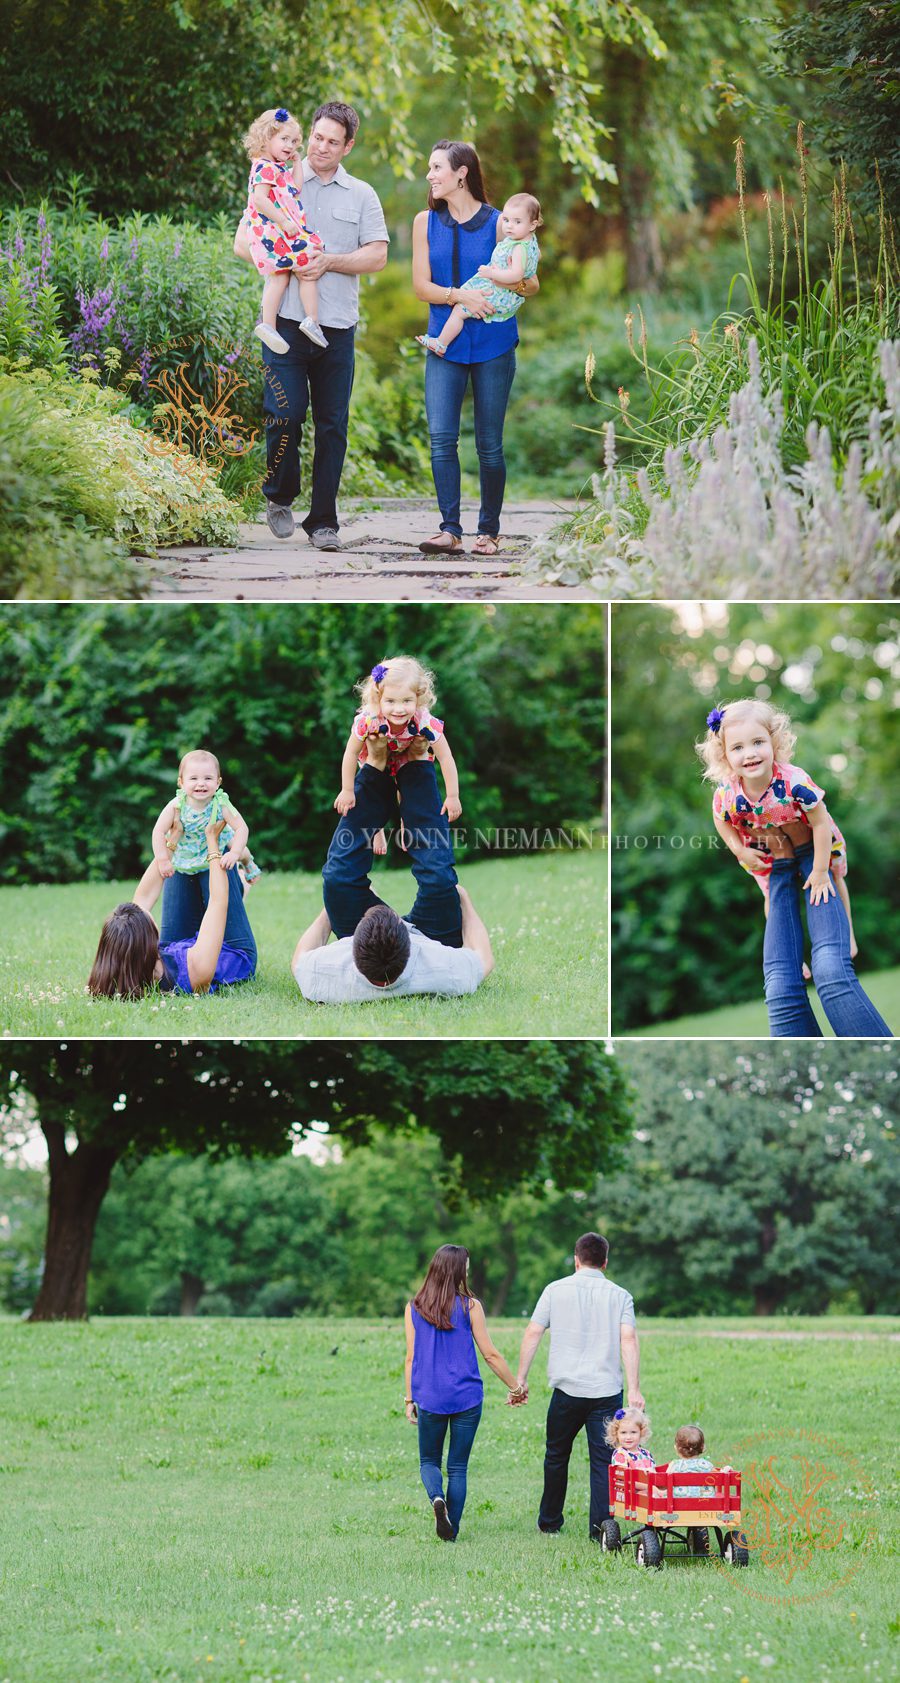 Authentic St. Louis family photography showing the bonds of parents with their young children taken by Yvonne Niemann Photography.